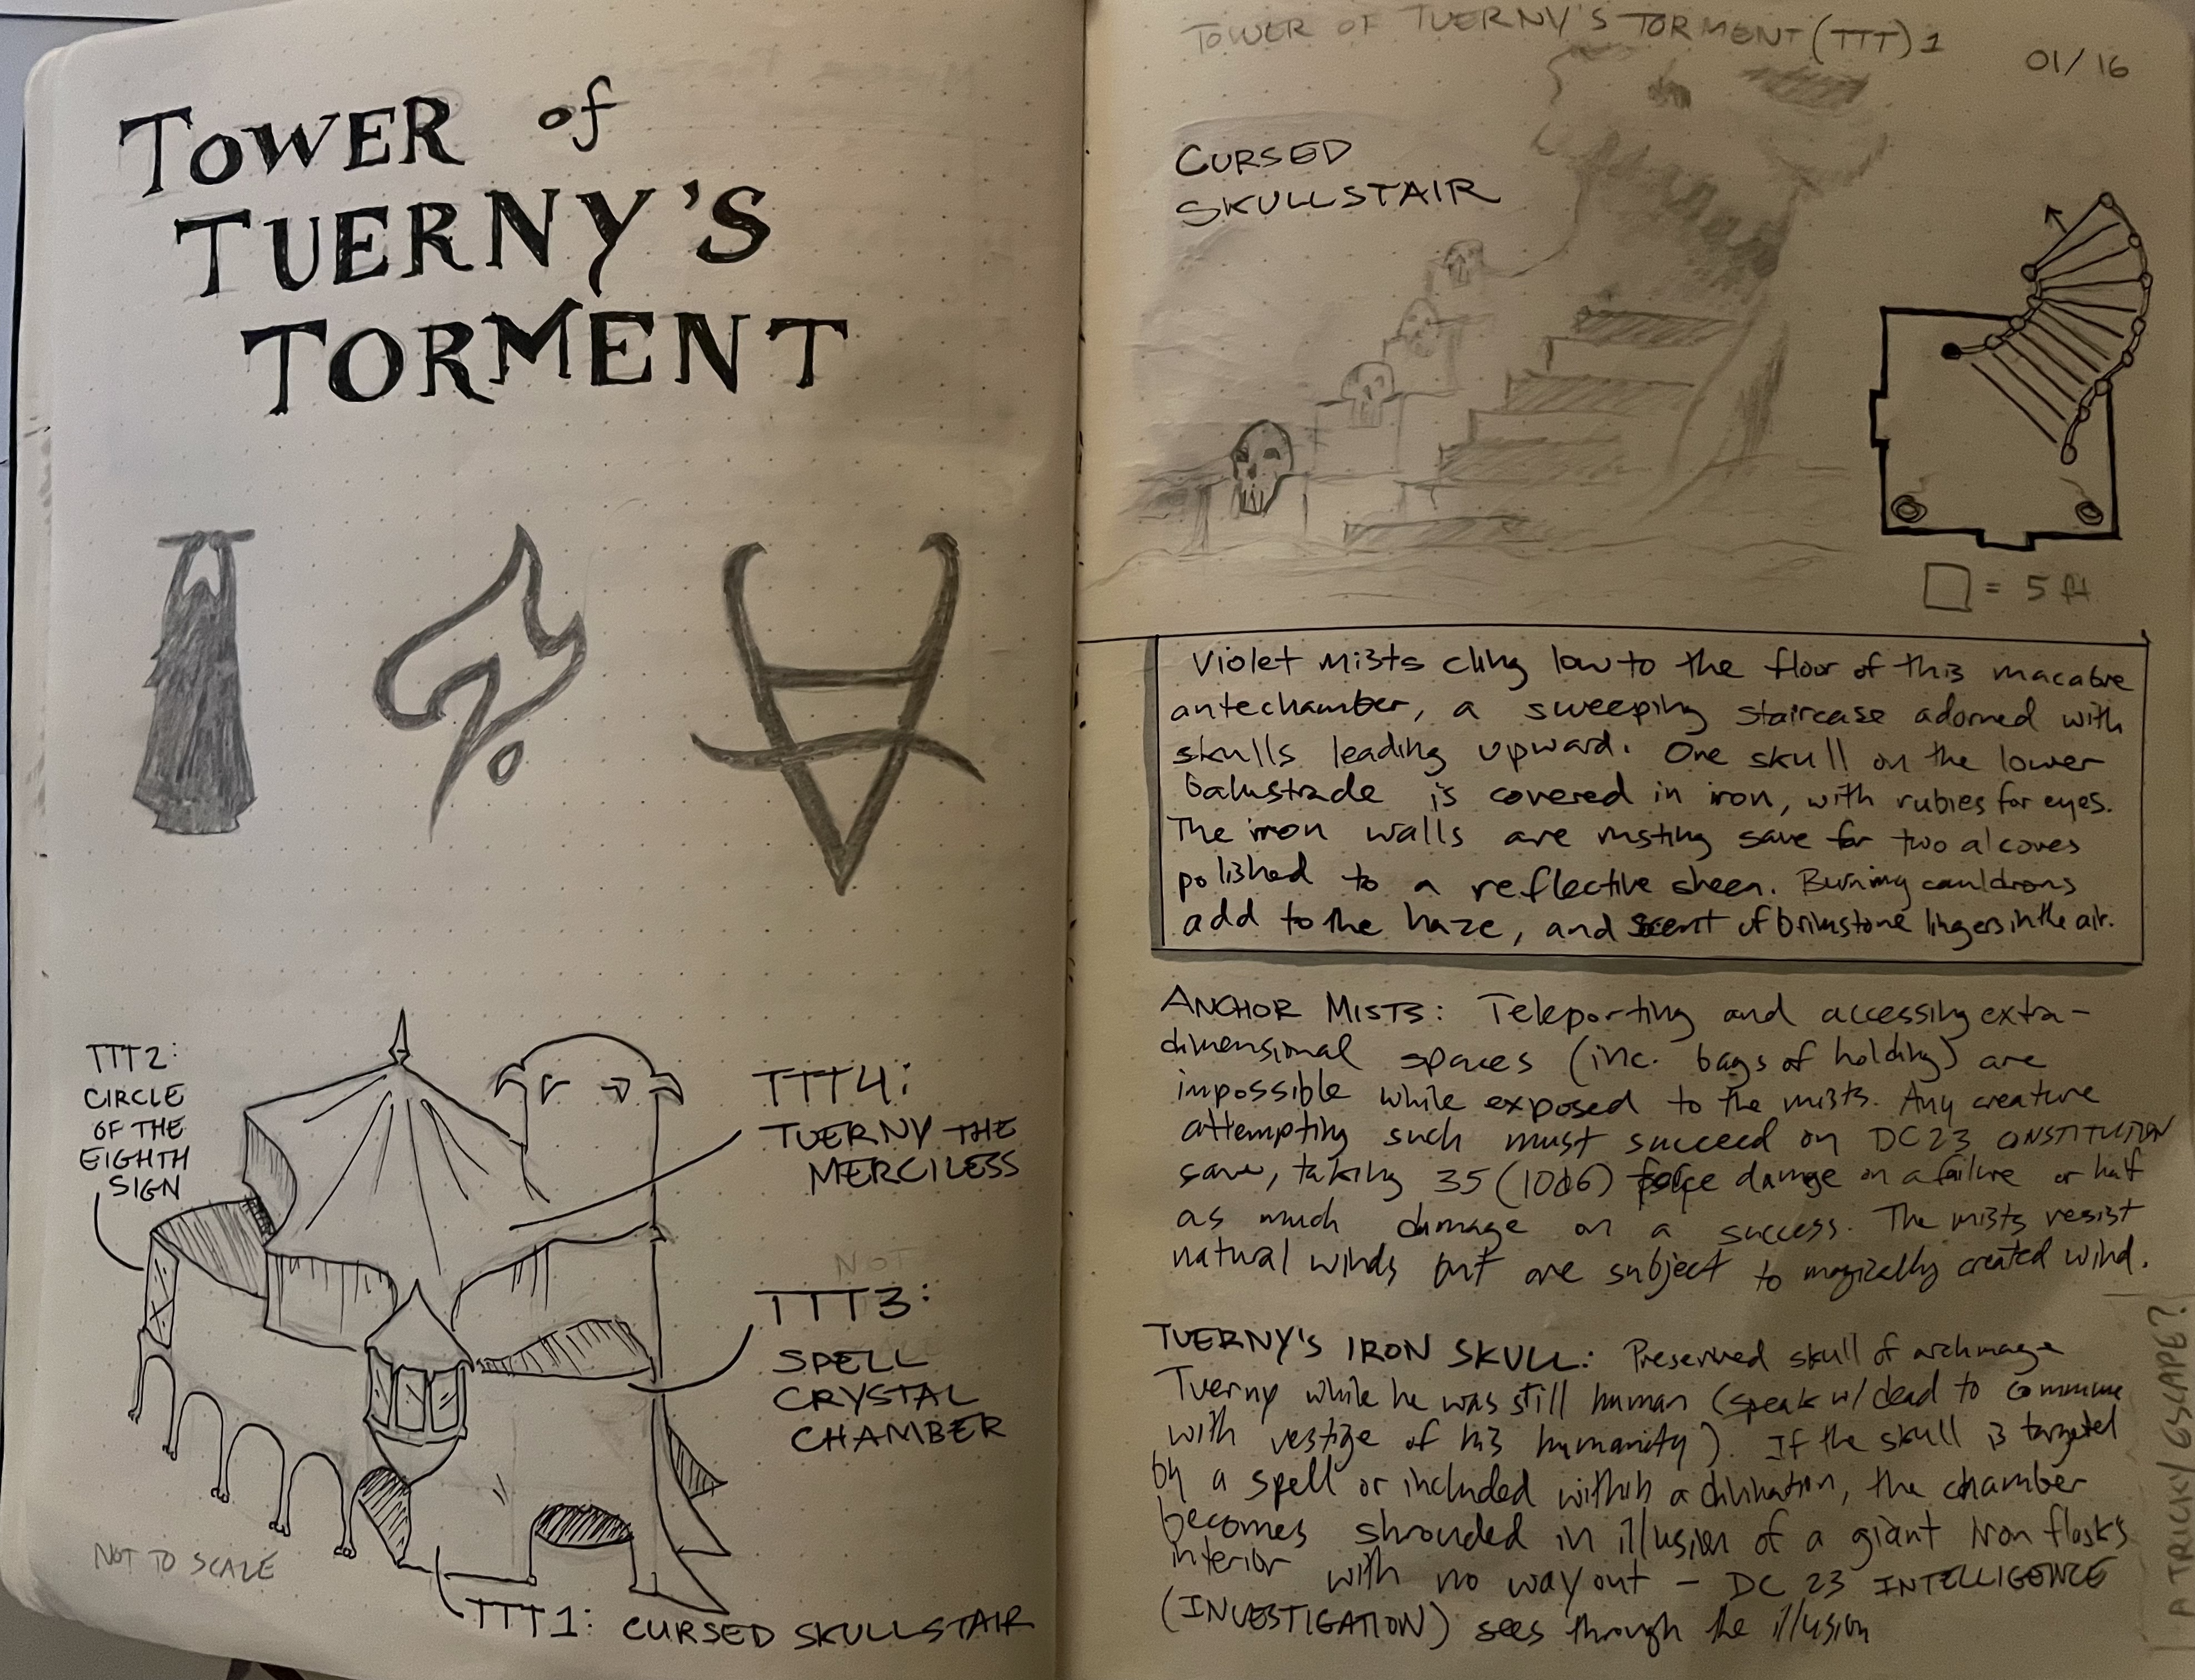 01-16 tower of tuerny's torment.jpg